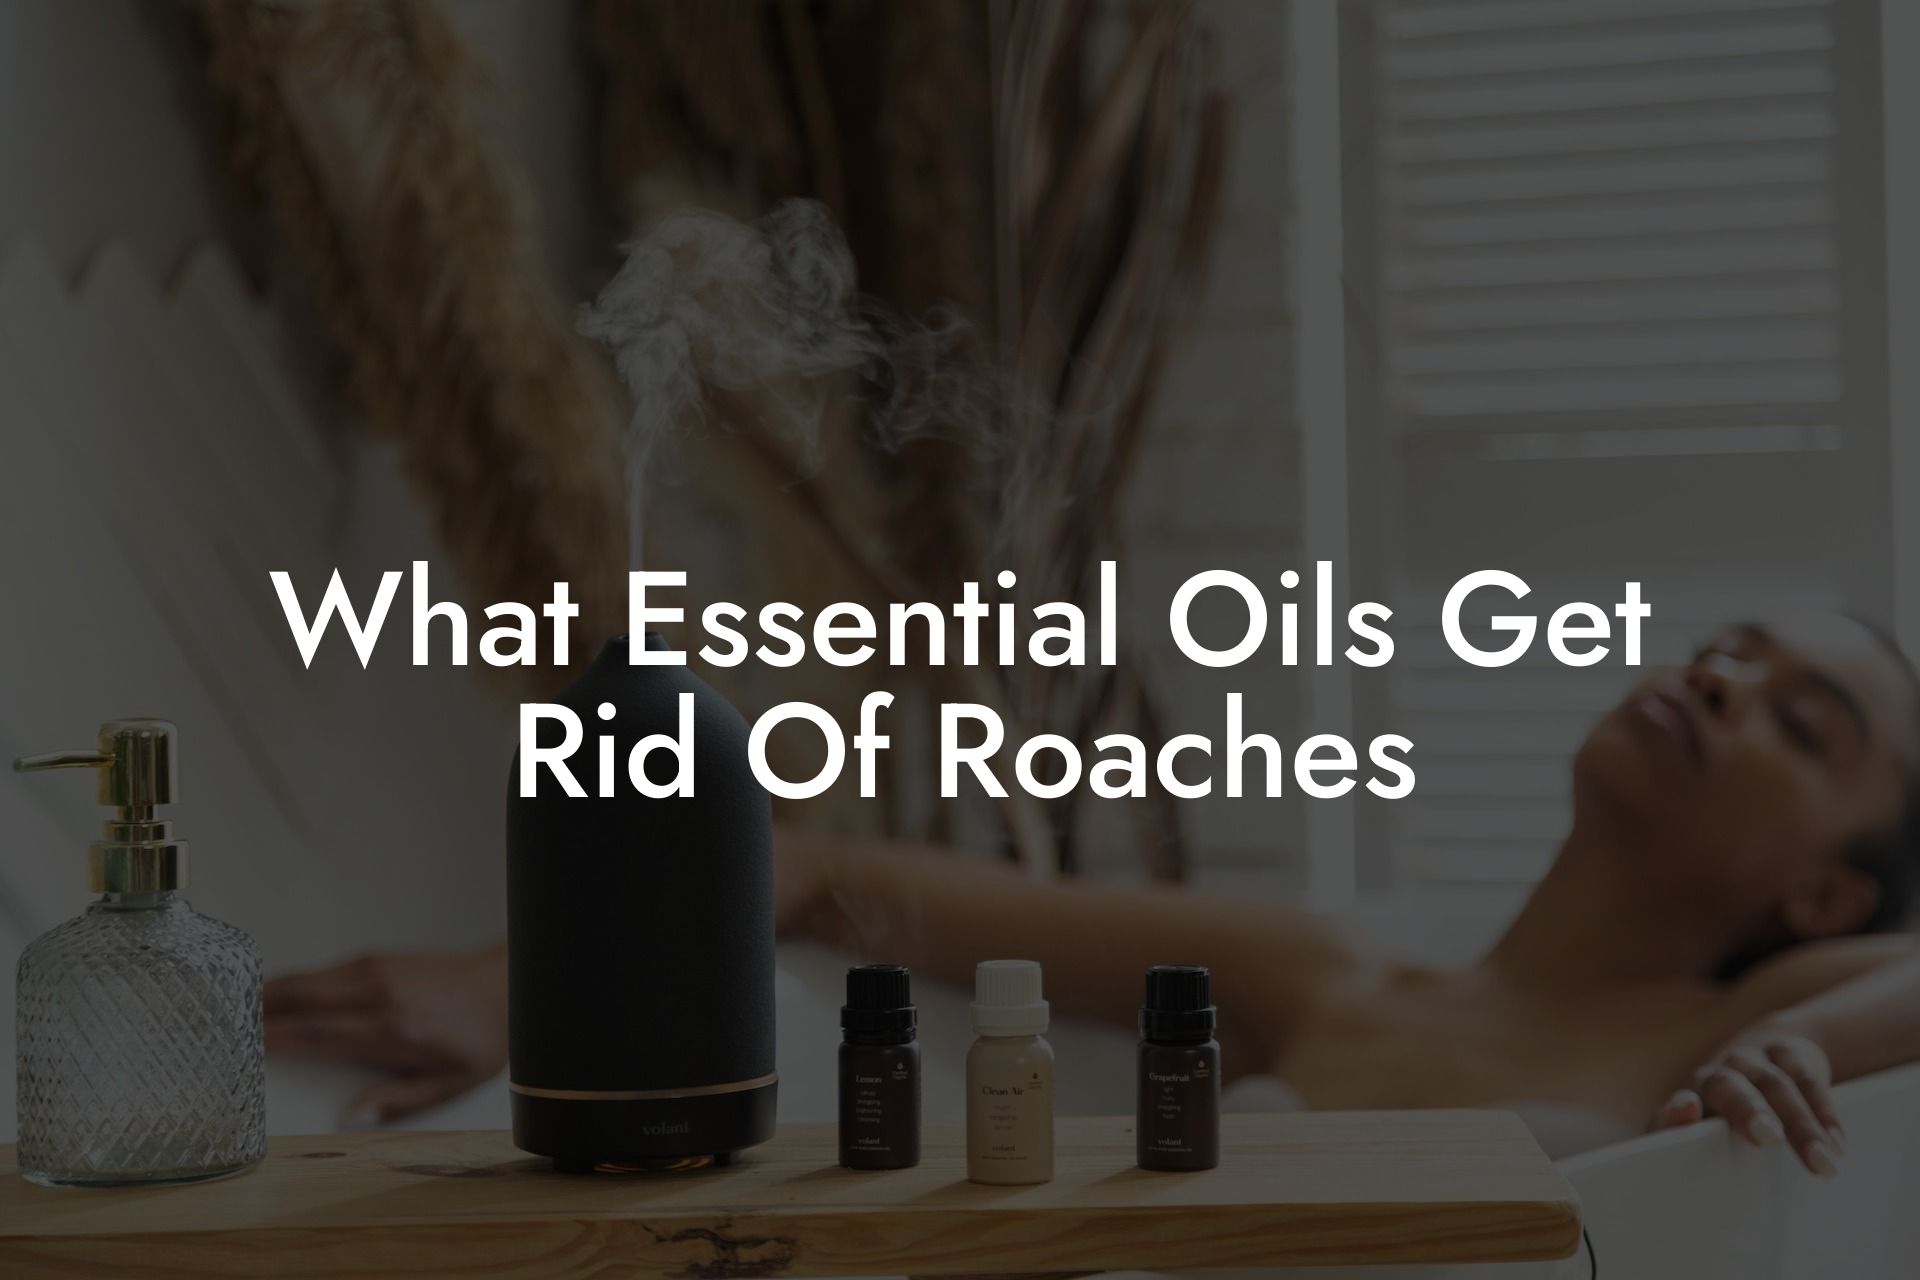 What Essential Oils Get Rid Of Roaches